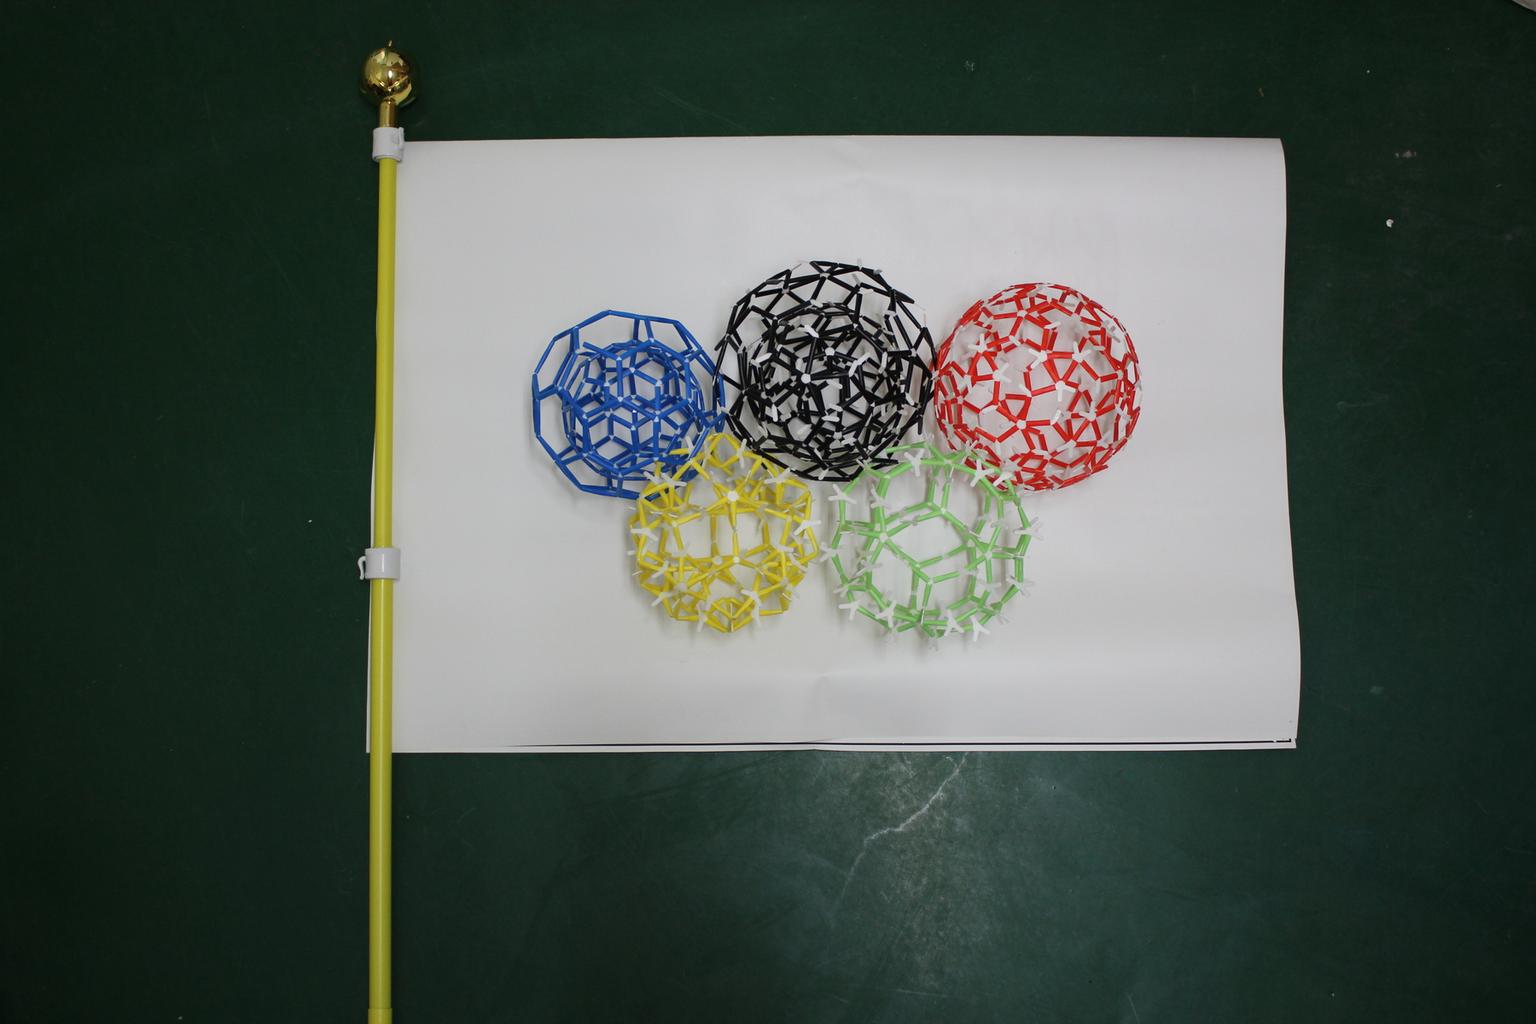 Image for entry 'Solid Olympic flag'